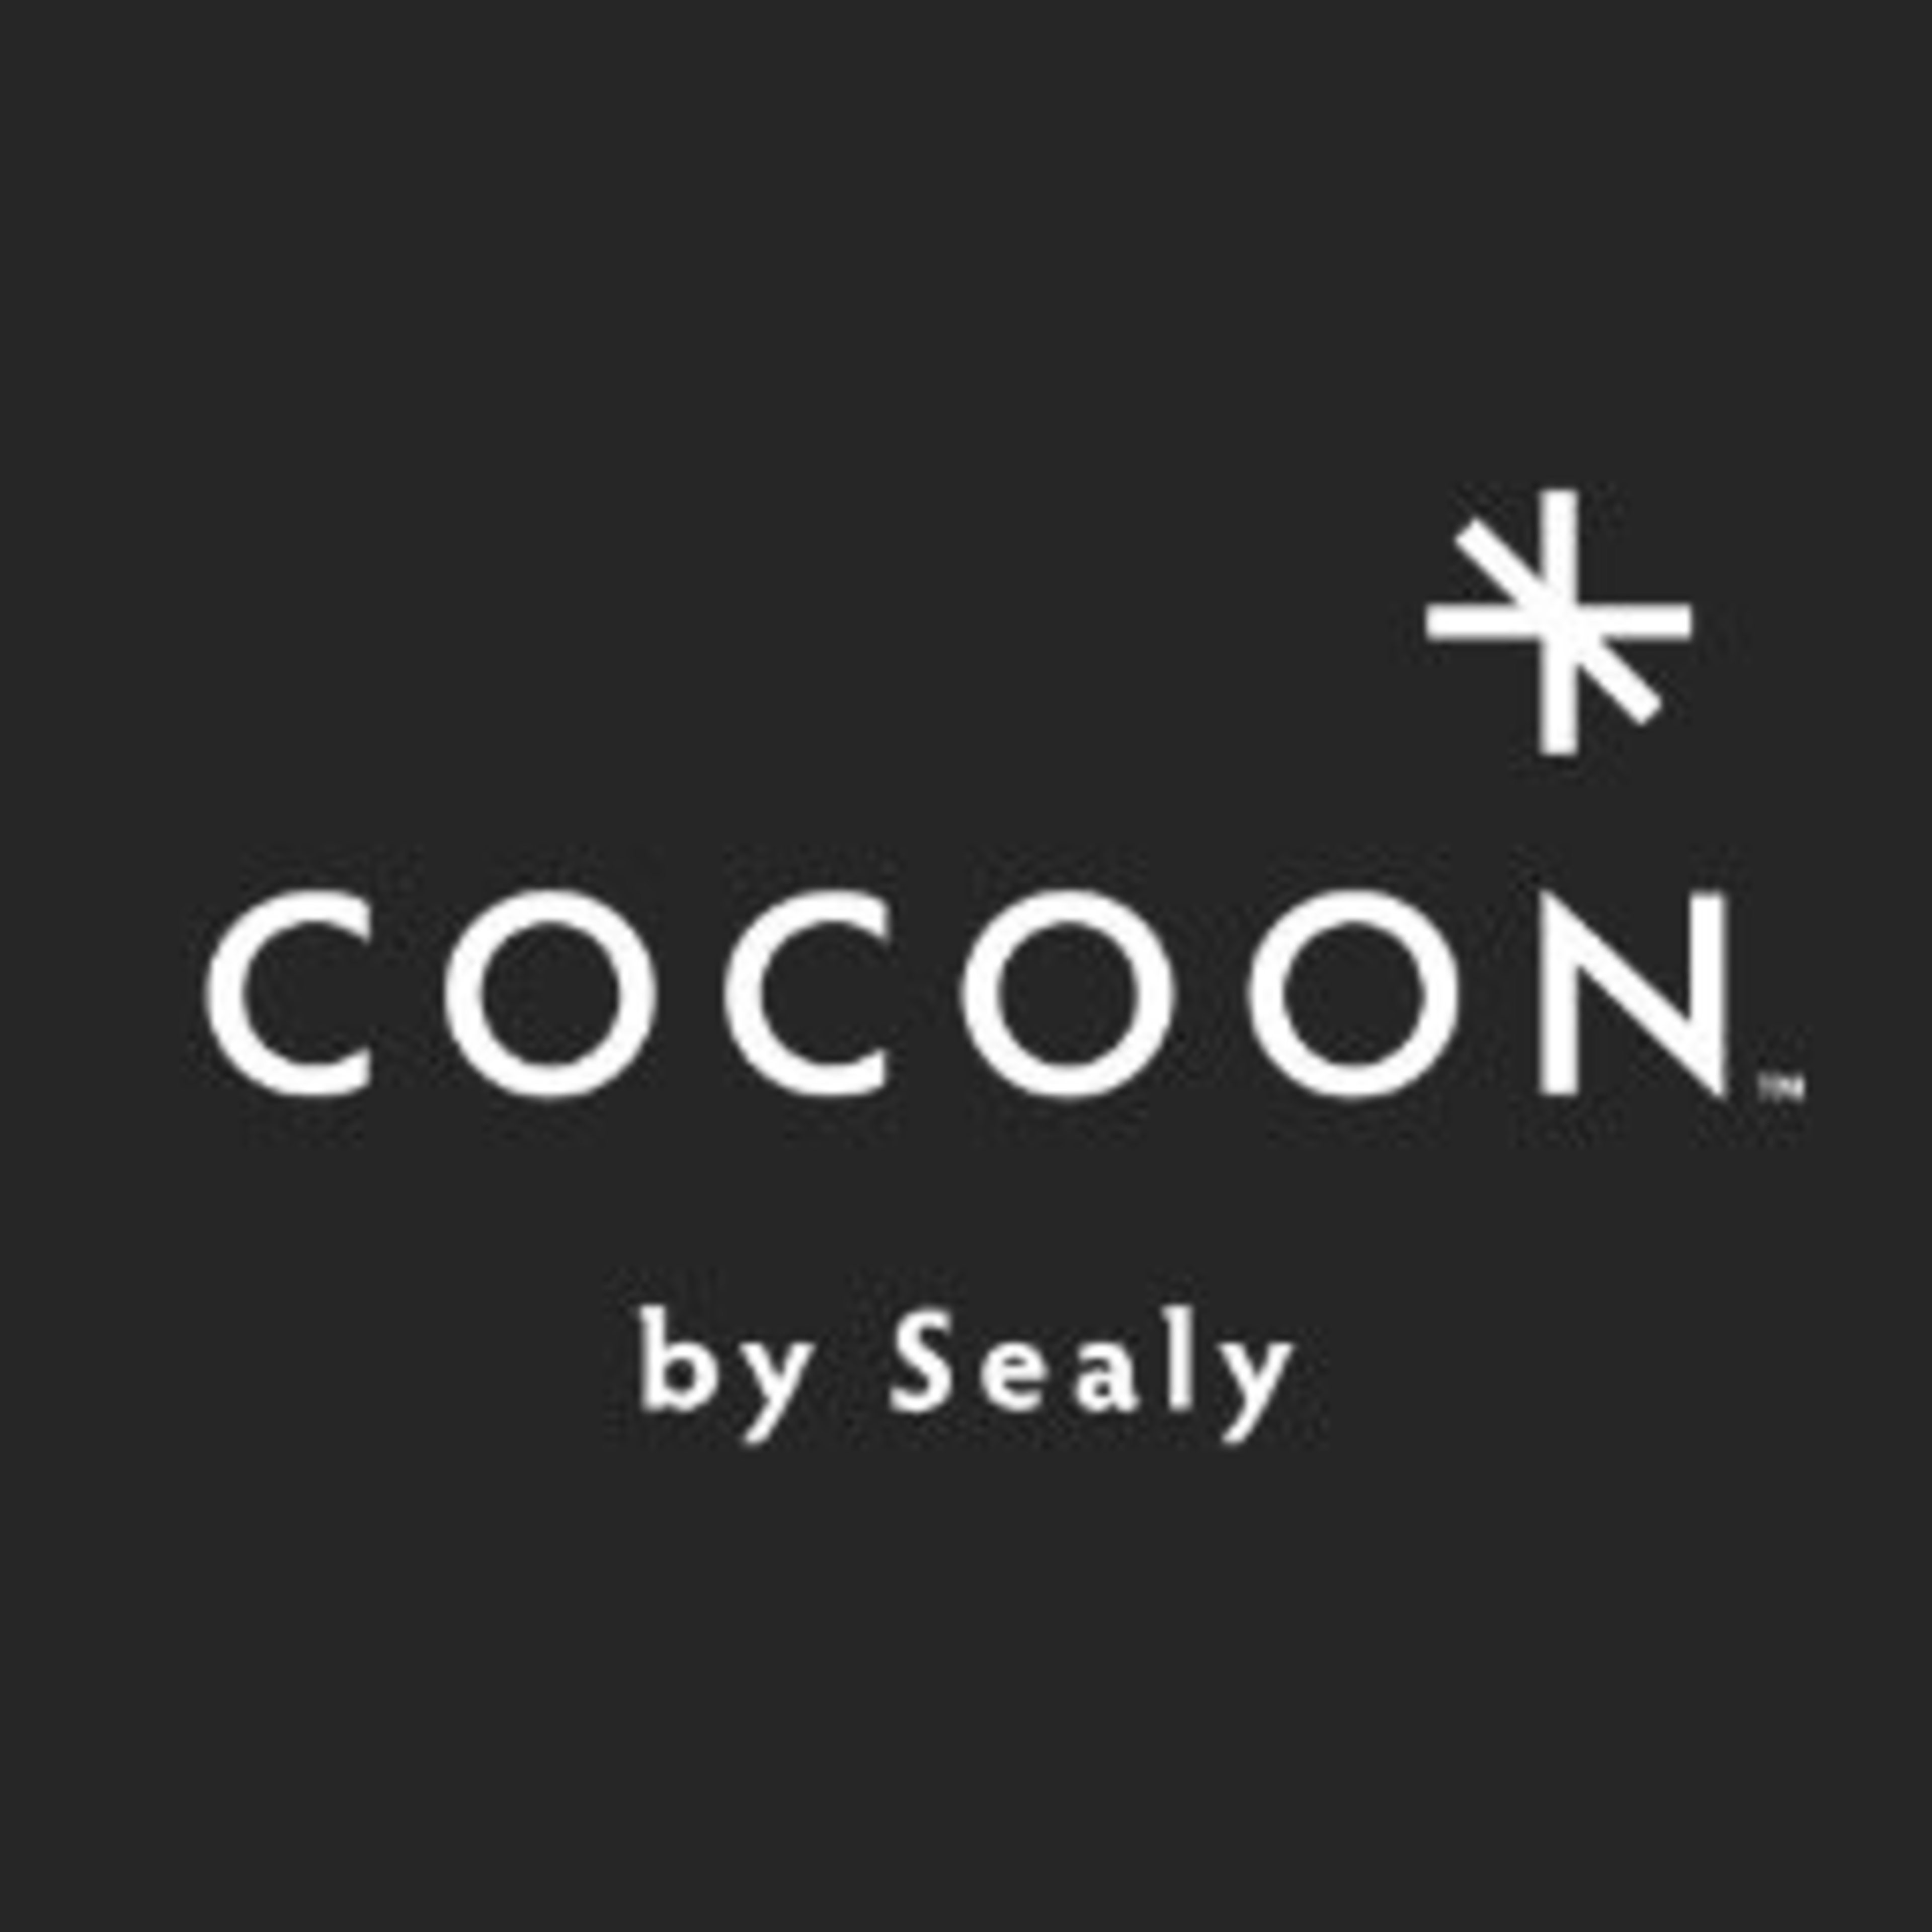 Cocoon by Sealy Code